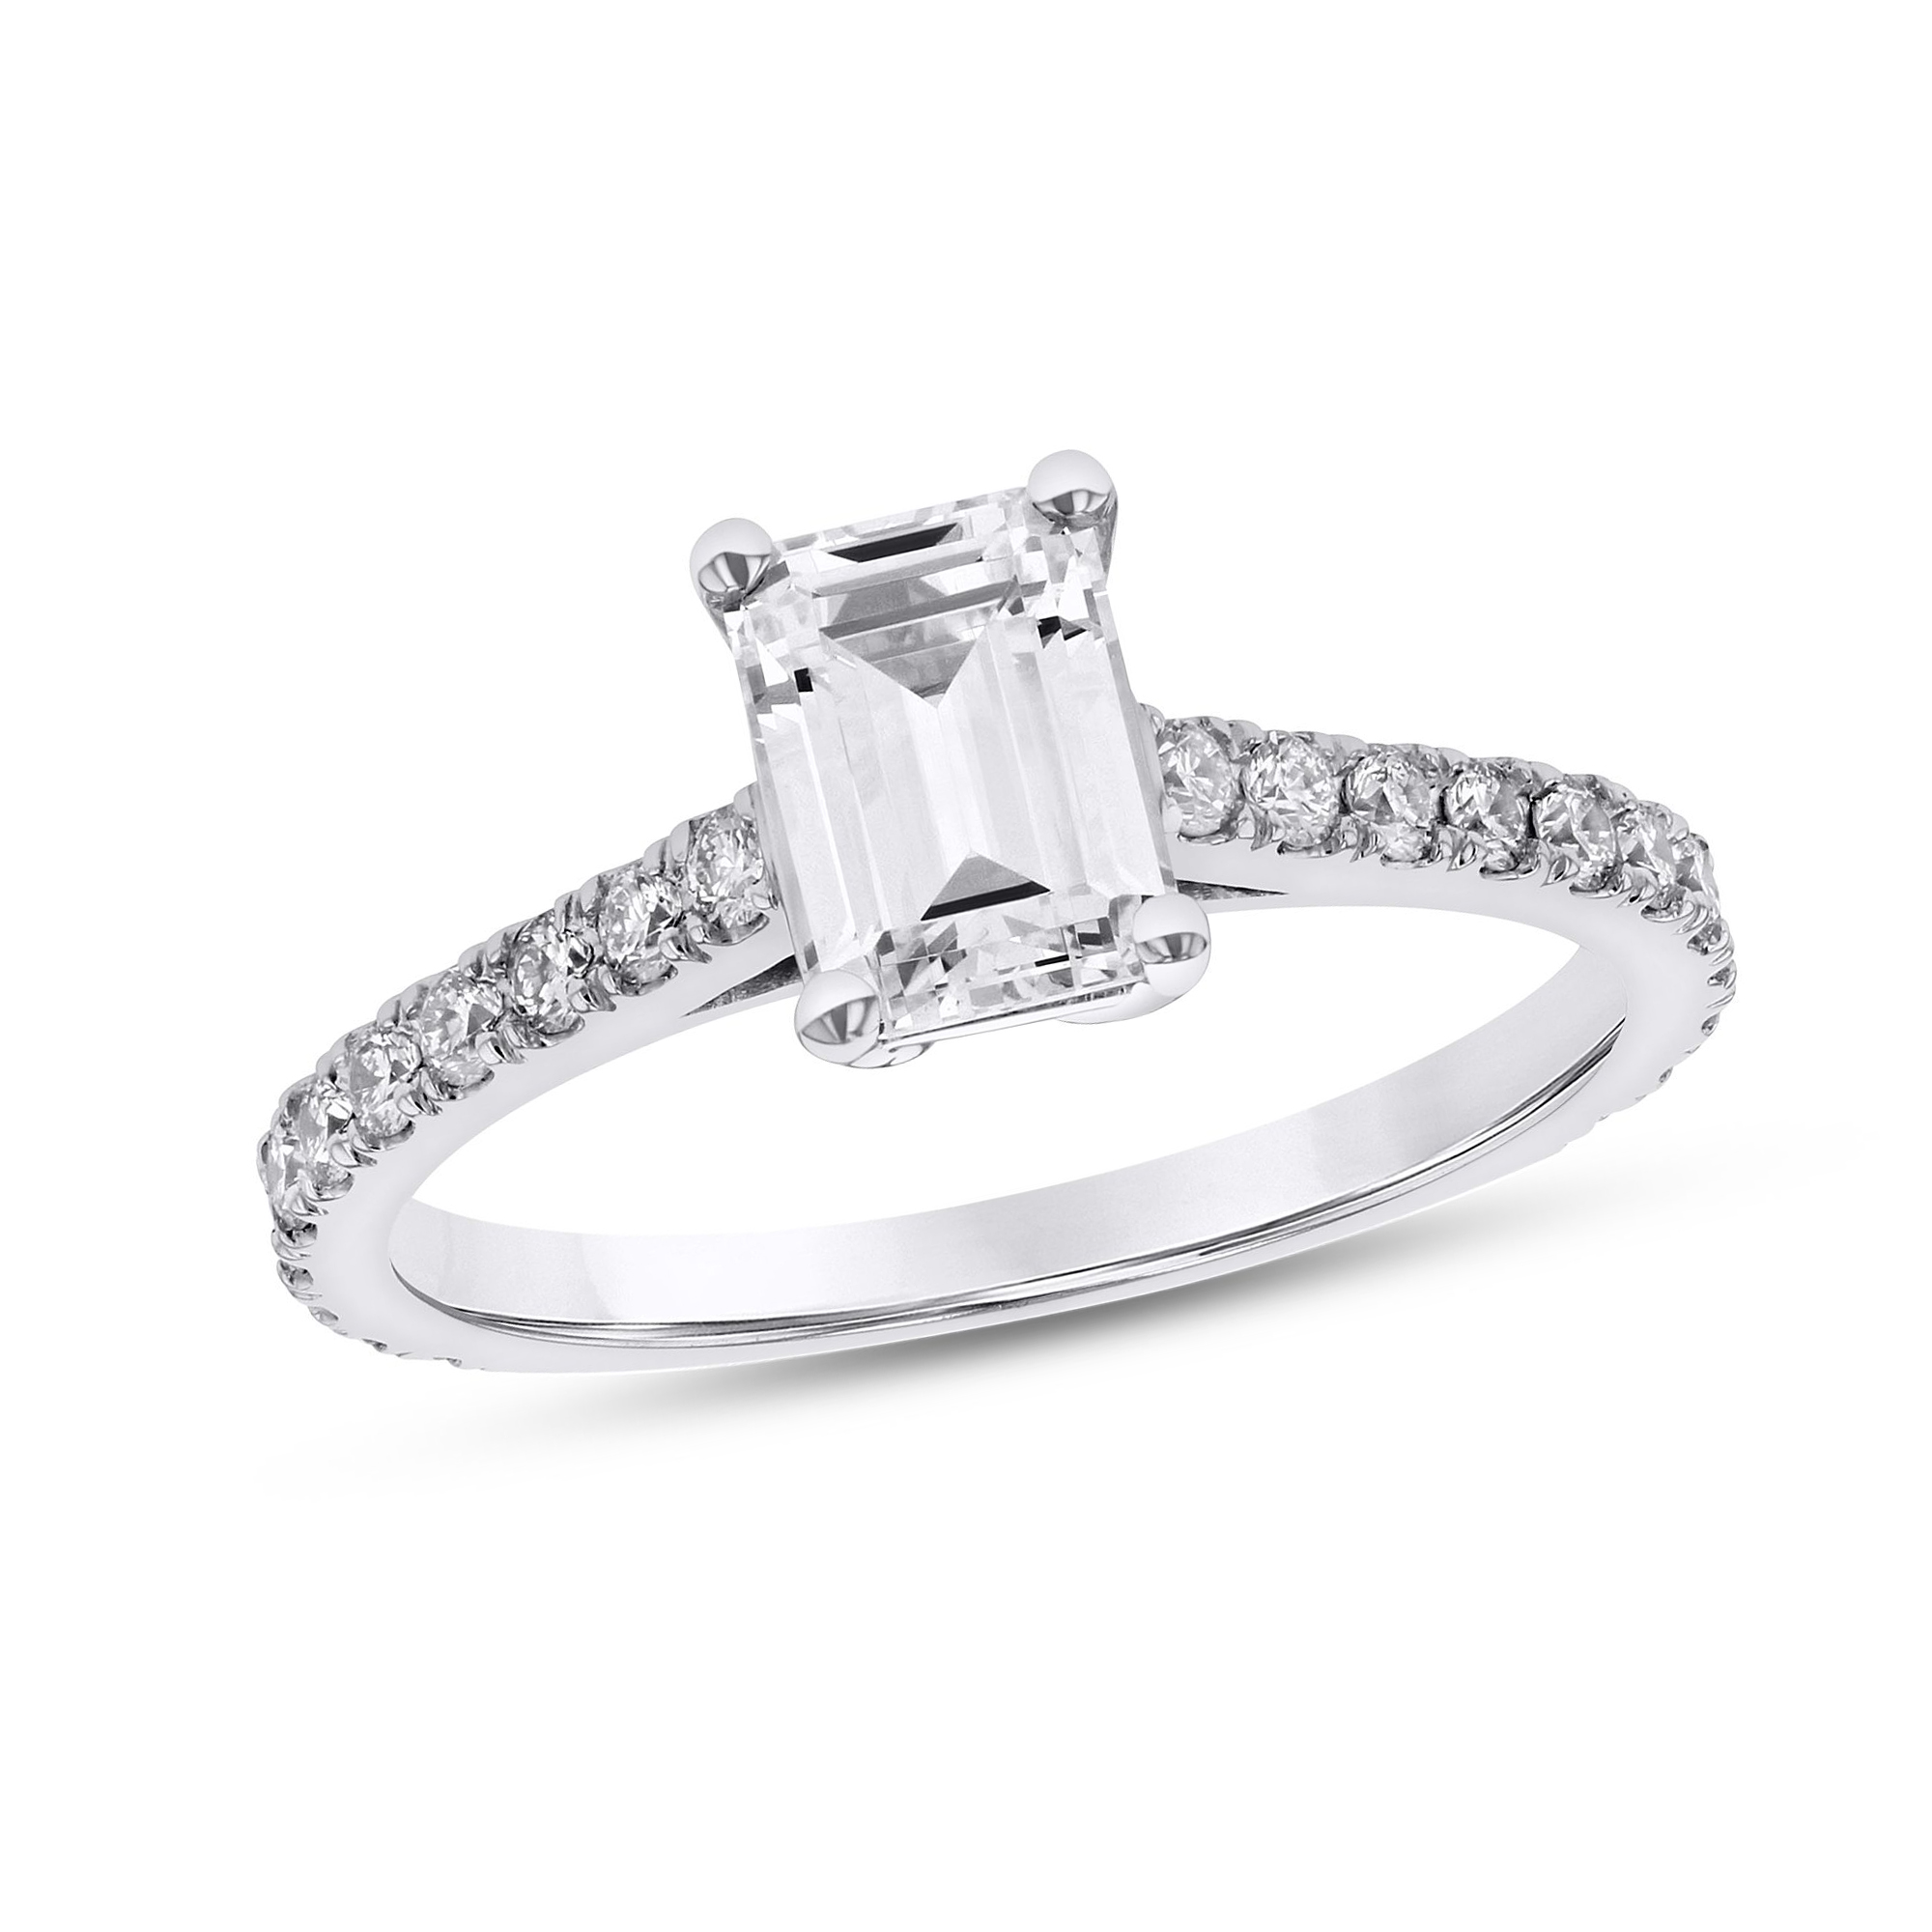 View 1.30ctw Diamond Emerald Cut Engagment Ring in 14k White Gold